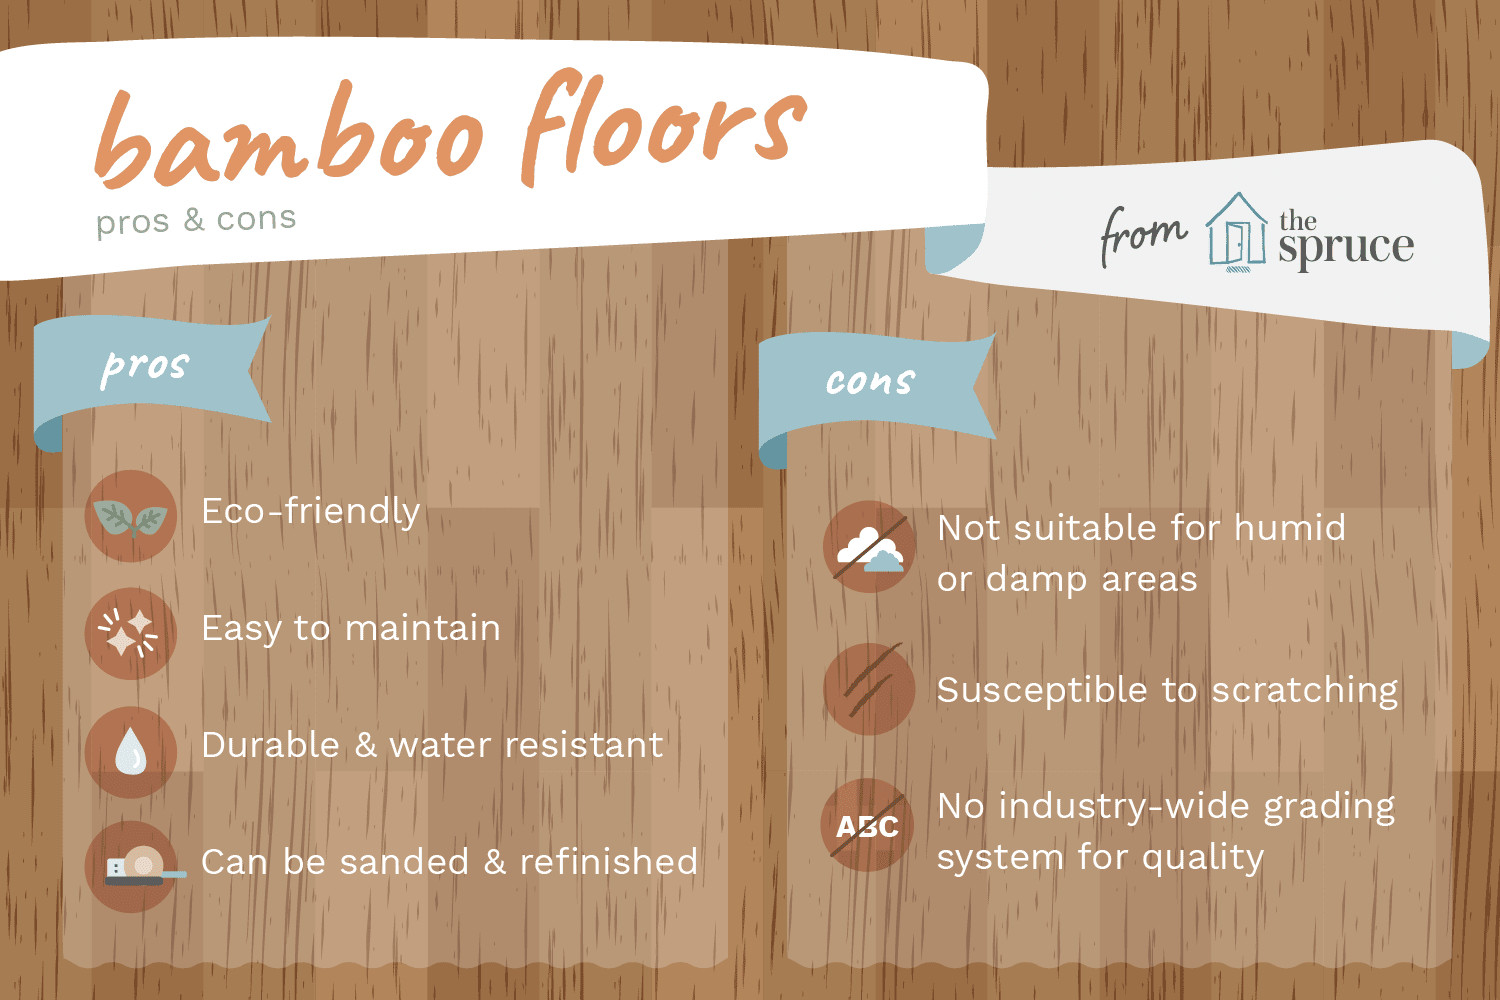 knoxville hardwood floor refinishing of the advantages and disadvantages of bamboo flooring inside benefits and drawbacks of bamboo floors 1314694 v3 5b102fccff1b780036c0a4fa